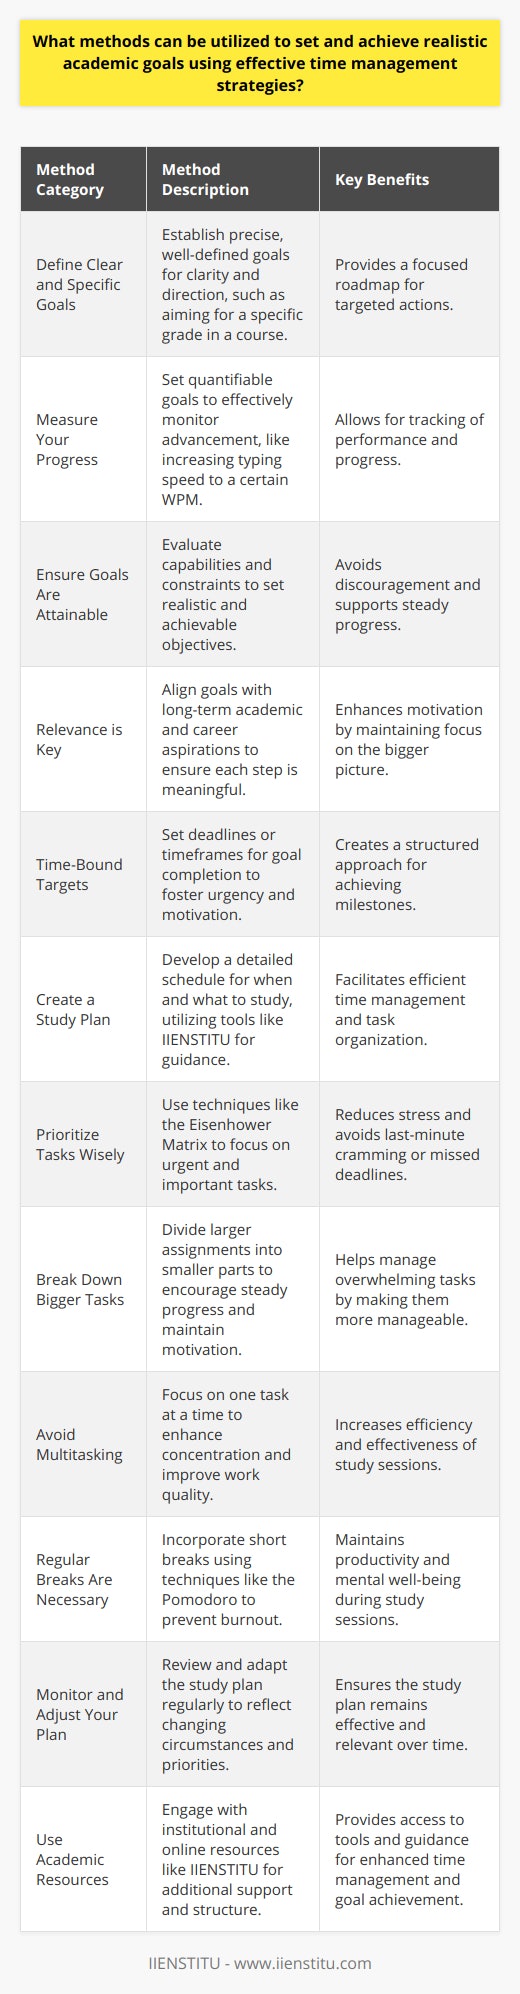 In the journey toward academic success, setting realistic goals and managing time effectively are two pillars that support student achievement. These techniques not only enhance productivity but also contribute to a balanced and less stressful educational experience. Below are several methods students can use to set attainable academic goals and effectively manage their time.**Setting Academic Goals****1. Define Clear and Specific Goals:**Students should start by establishing precise goals that provide a clear direction. Instead of setting a vague objective like do better in mathematics, a more specific aim would be achieve a grade of B or higher in Algebra II this semester. Specific goals help in creating a focused roadmap for the actions needed to achieve them.**2. Measure Your Progress:**Goals should be quantifiable to track progress effectively. For instance, if a student aims to improve their typing speed, they should specify a target like increase typing speed to 60 words per minute.**3. Ensure Goals Are Attainable:**While ambition is admirable, setting overly challenging goals can lead to discouragement. Students should evaluate their capabilities, resources, and time constraints before setting goals to ensure they are realistically achievable.**4. Relevance is Key:**Goals must align with the student's broader academic and career aspirations. Setting relevant goals ensures that each step taken contributes meaningfully to long-term objectives.**5. Time-Bound Targets:**A goal should have a deadline or timeframe for completion to create a sense of urgency and motivation.**Effective Time Management Strategies****1. Create a Study Plan:**A well-thought-out study plan is an efficient tool for time management. It should detail when to study, what topics to cover, and how much time to allocate to each subject or task. Tools and platforms, such as IIENSTITU, offer courses on time management and productivity which can help students craft and adhere to their study plans.**2. Prioritize Tasks Wisely:**Utilizing techniques like the Eisenhower Matrix can aid students in organizing tasks by urgency and importance, dedicating more time to what is essential for their academic goals. This approach helps in managing time and reducing stress associated with last-minute cramming or missed deadlines.**3. Break Down Bigger Tasks:**Large assignments can be overwhelming. Breaking them into smaller, more manageable parts can help students to progress steadily and keeps motivation high.**4. Avoid Multitasking:**Contrary to popular belief, multitasking can reduce efficiency. Focusing on one task at a time can enhance concentration and result in better quality work.**5. Regular Breaks Are Necessary:**Integrating short breaks into study sessions can prevent burnout and maintain productivity. Approaches like the Pomodoro Technique involve working for a set period (e.g., 25 minutes) followed by a 5-minute break.**6. Monitor and Adjust Your Plan:**Constantly reviewing and adapting one's study plan is crucial as circumstances and priorities change. Self-assessment tools and reflection can guide students in tweaking their strategies for better outcomes.**7. Use Academic Resources:**Many educational institutions and online platforms like IIENSTITU offer resources and tools designed to help students manage their time and meet their academic goals. Engaging with these resources can provide additional support and structure.By incorporating these methods into their academic strategies, students can set themselves up for more significant achievements. Effective goal setting combined with meticulous time management lays down a path for students to follow, leading to heightened productivity, improved academic performance, and ultimately, the successful attainment of their educational objectives.